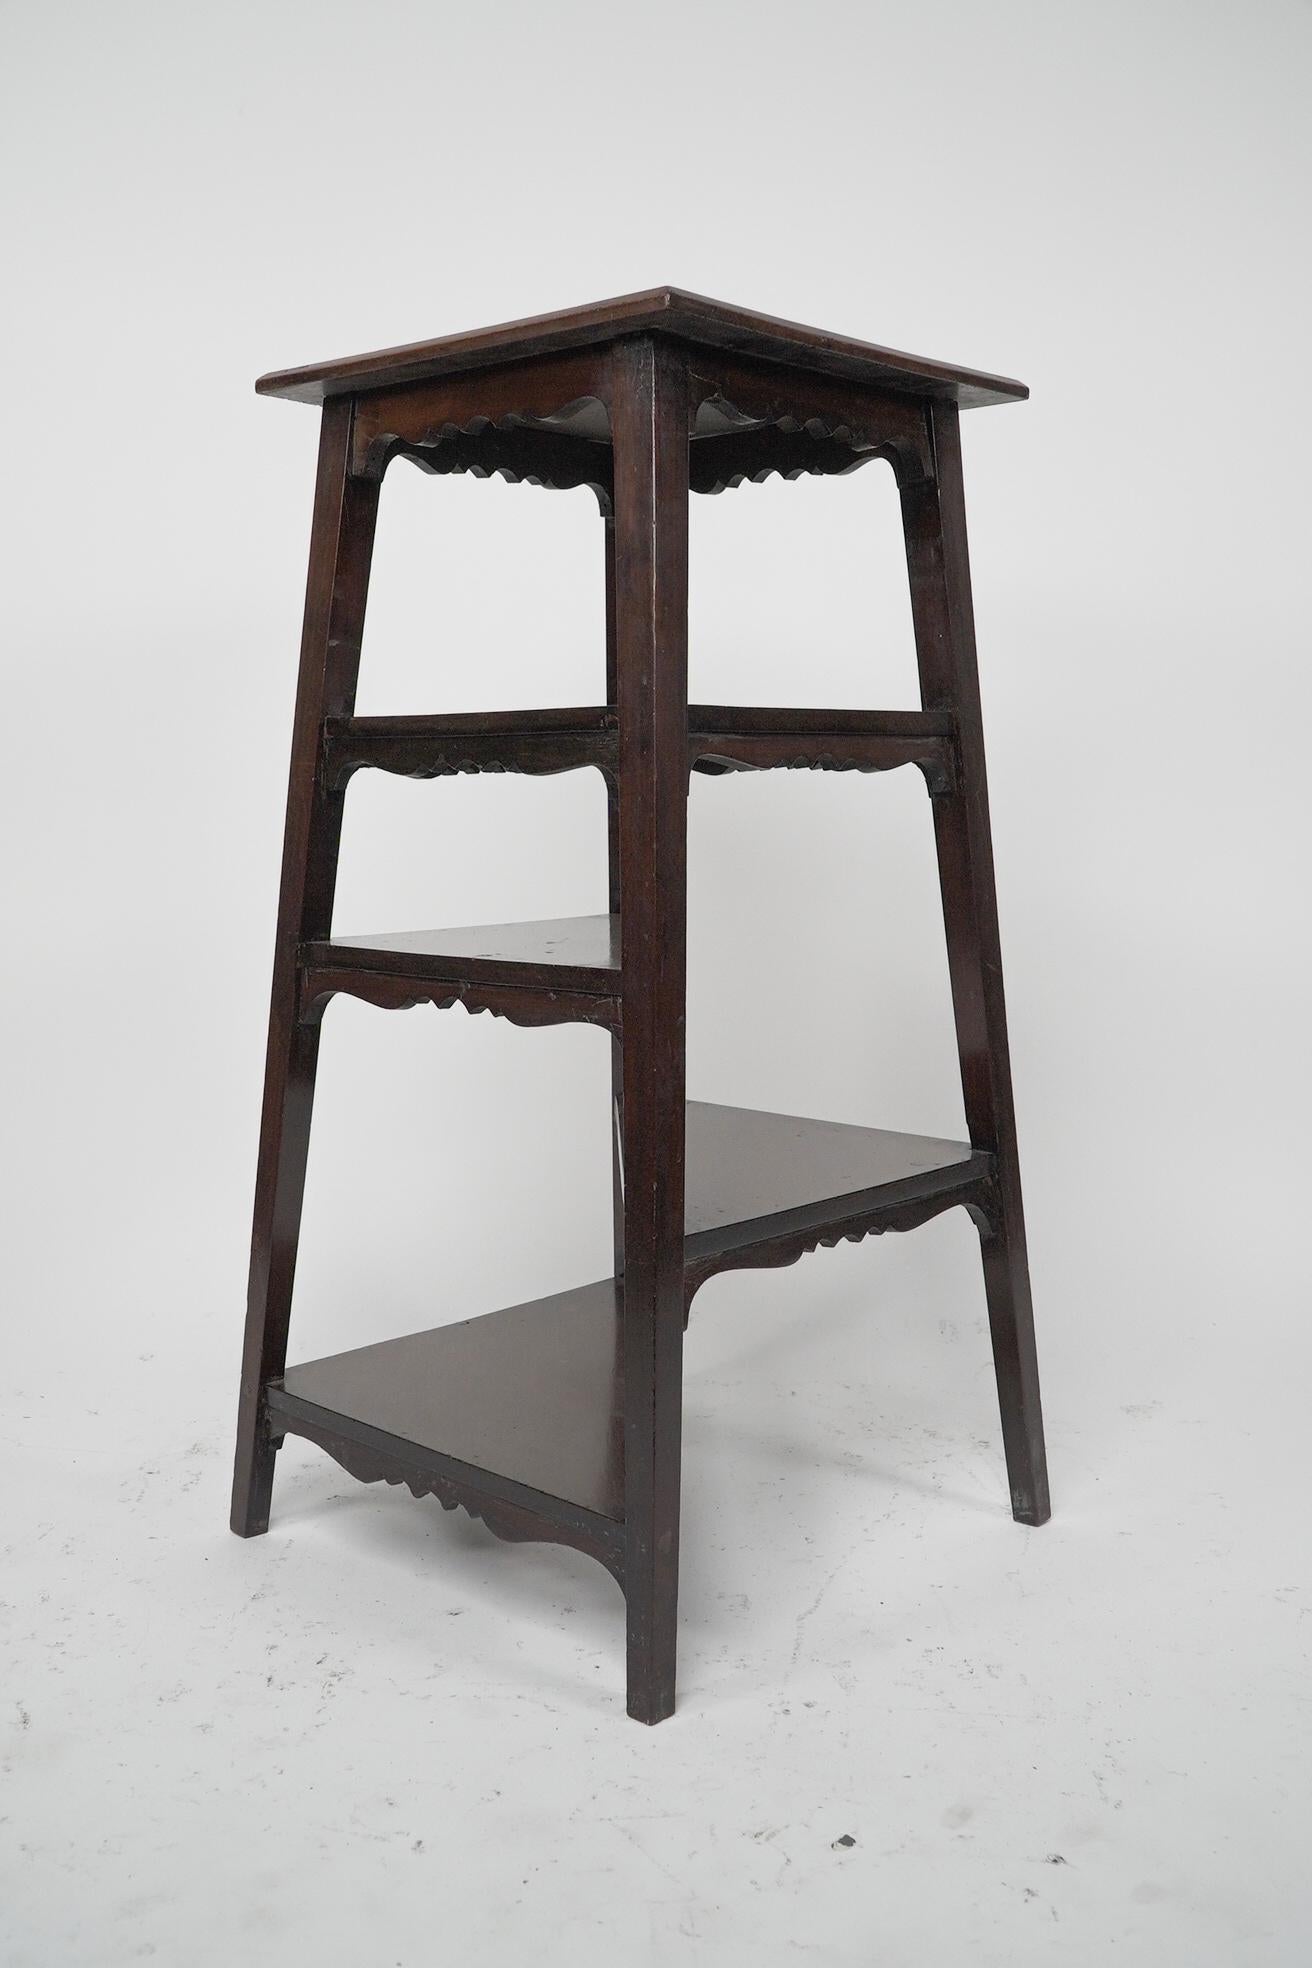 English Aesthetic Movement Walnut side table wot-not-stand with half triangle shelves. For Sale